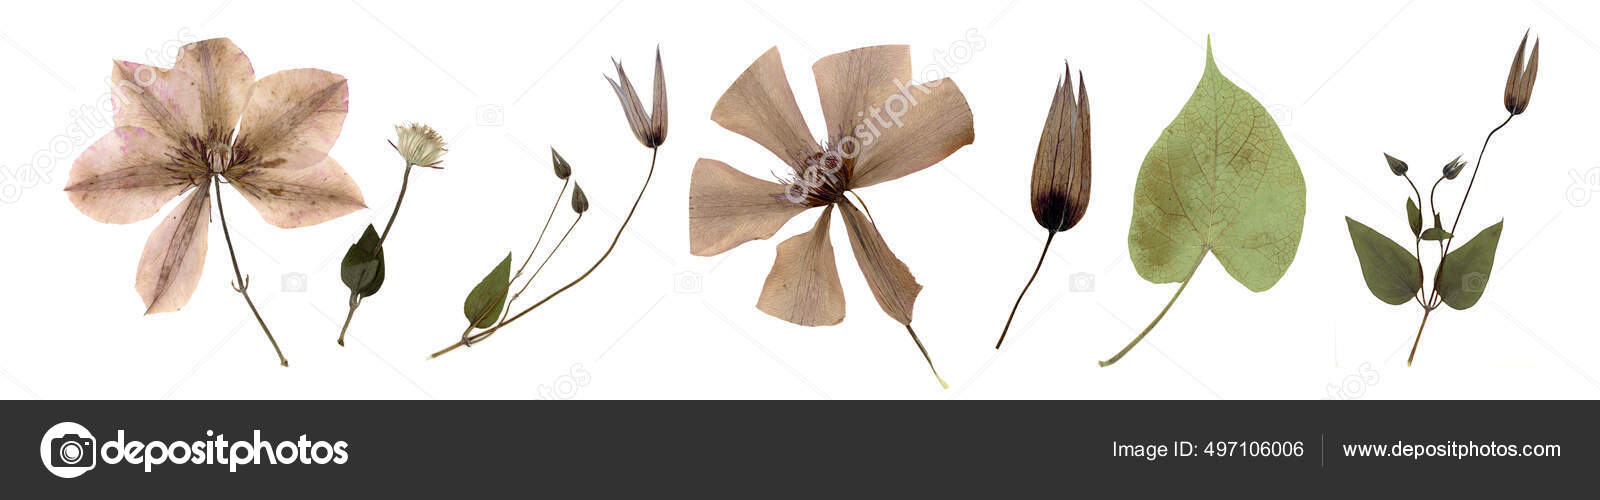 Composition of dried wildflowers isolated on a white background